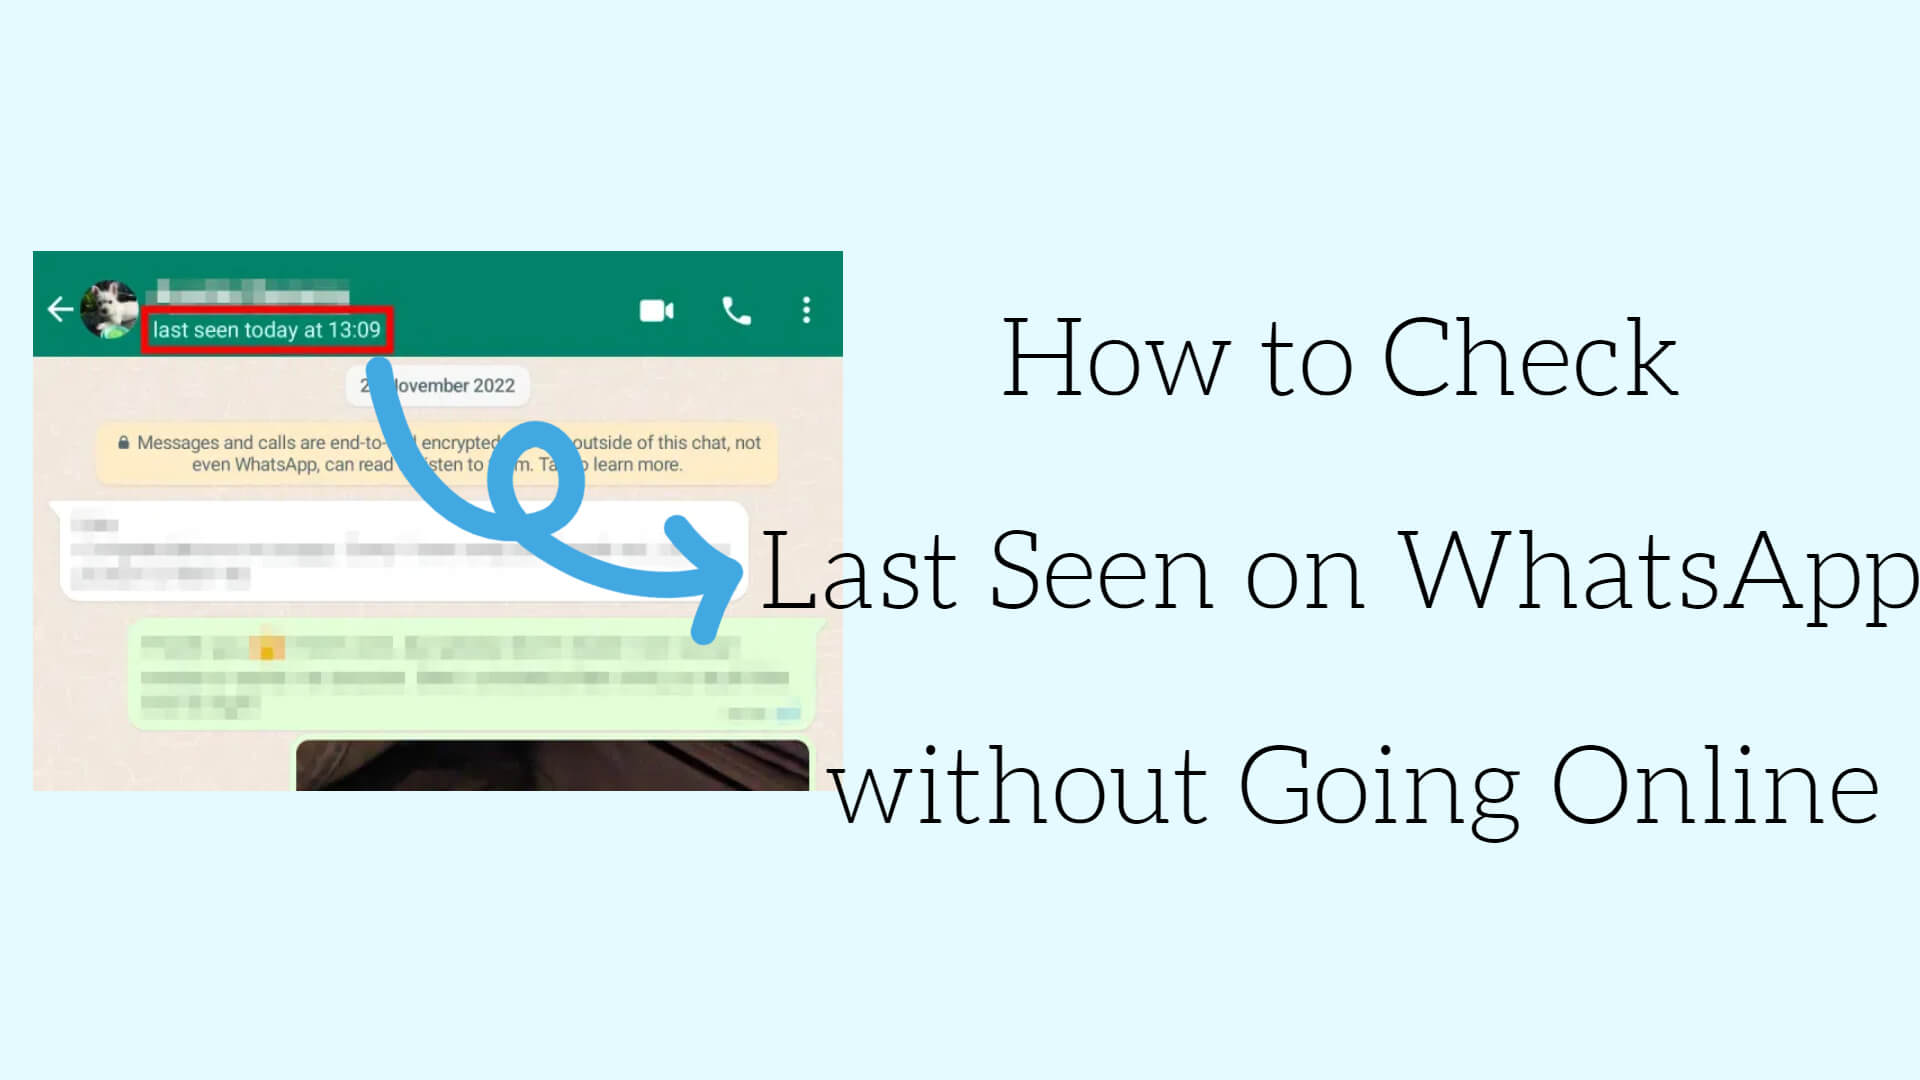 how to check last seen on whatsapp without going online